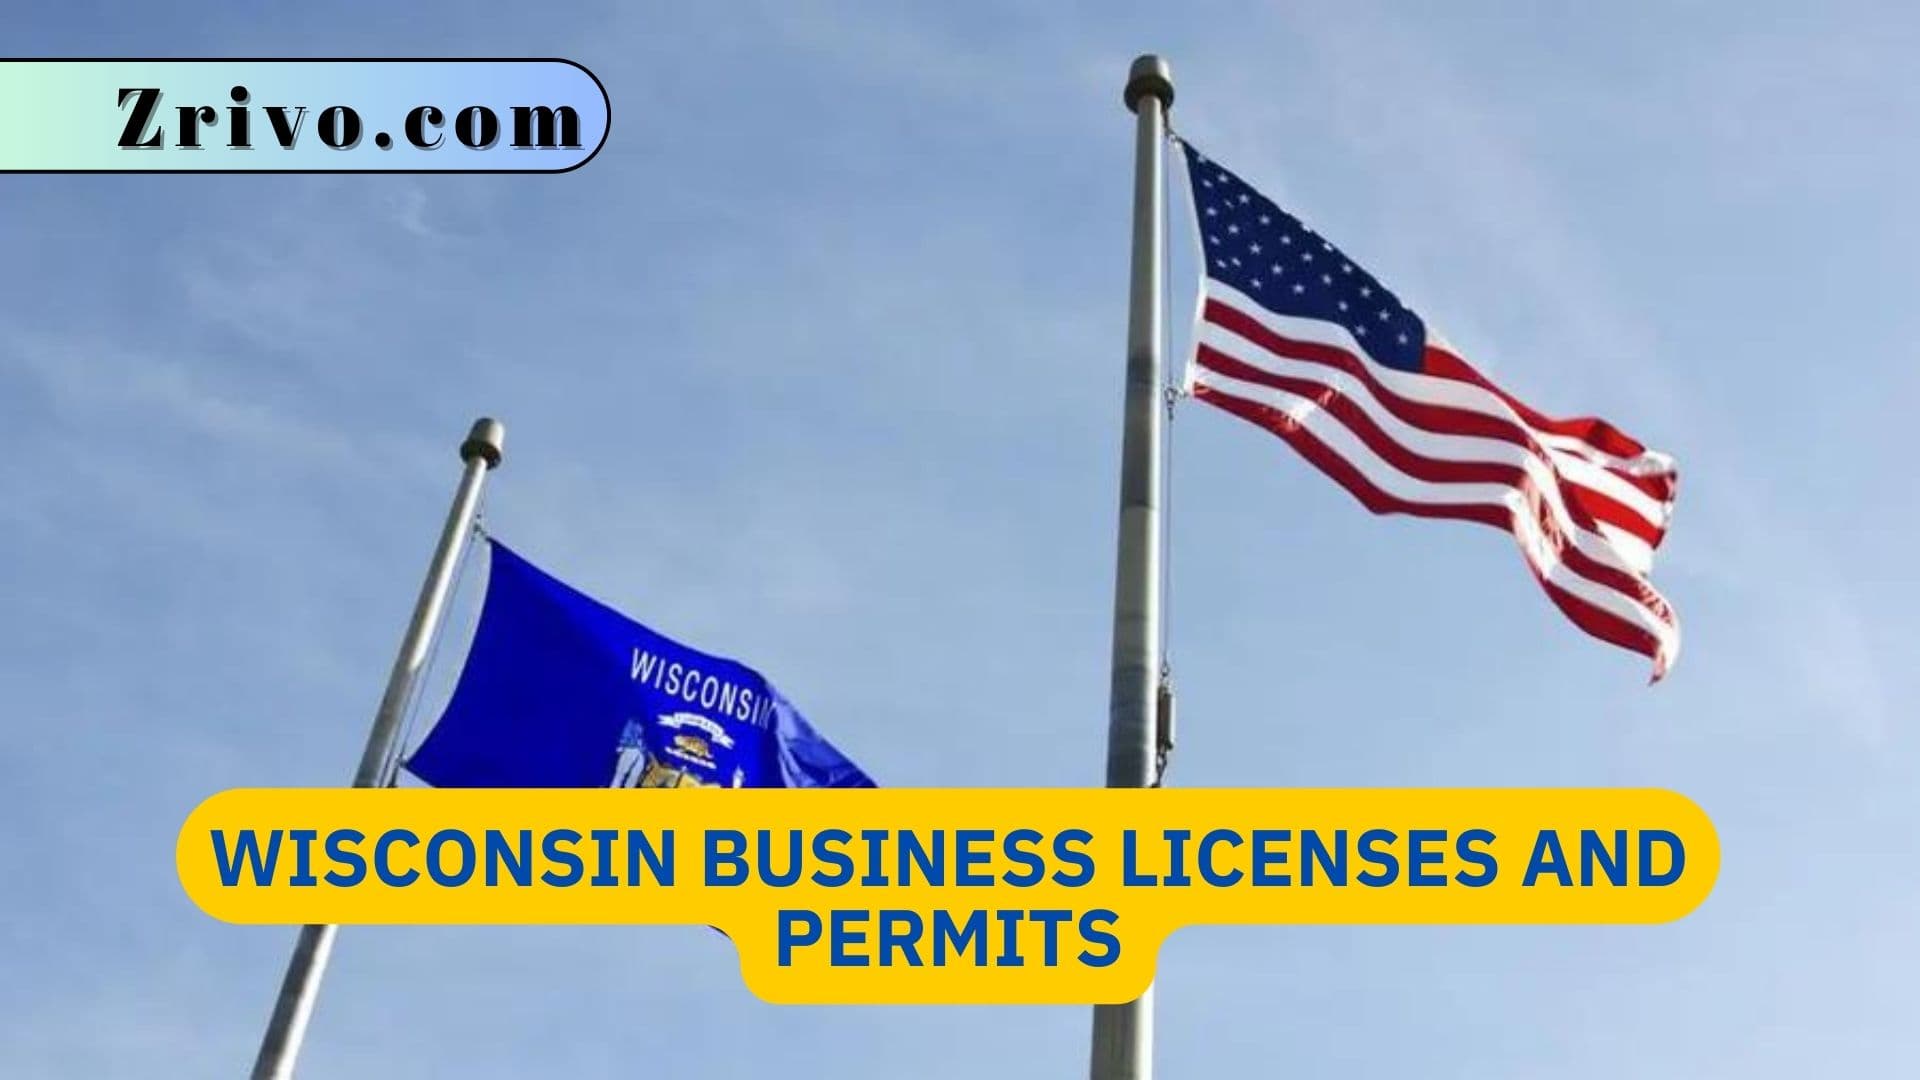 Wisconsin Business Licenses and Permits